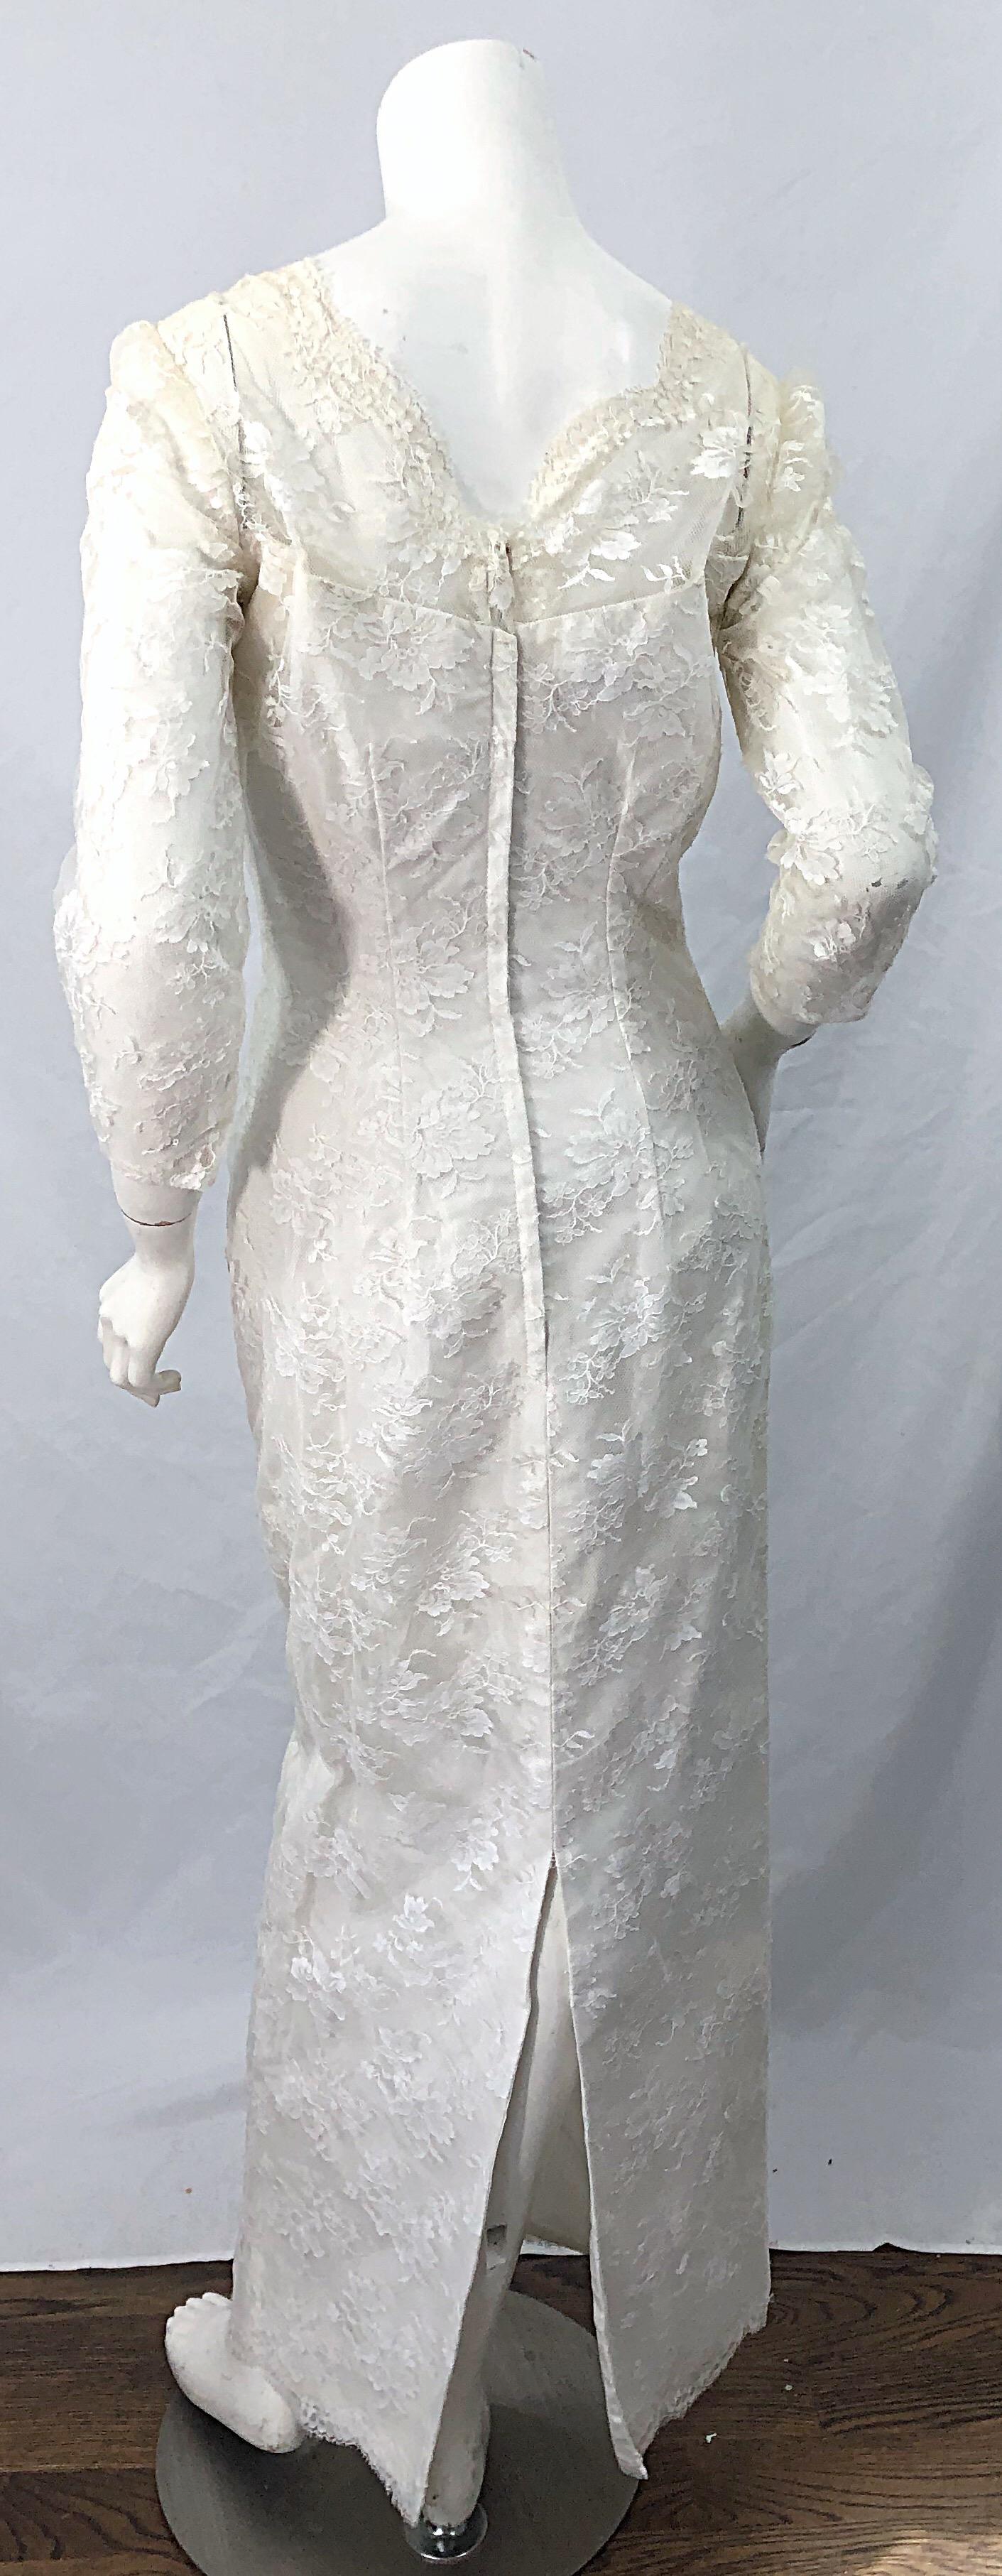 1960s An Original By Constantino White Beaded Couture Vintage Wedding Dress Gown For Sale 2